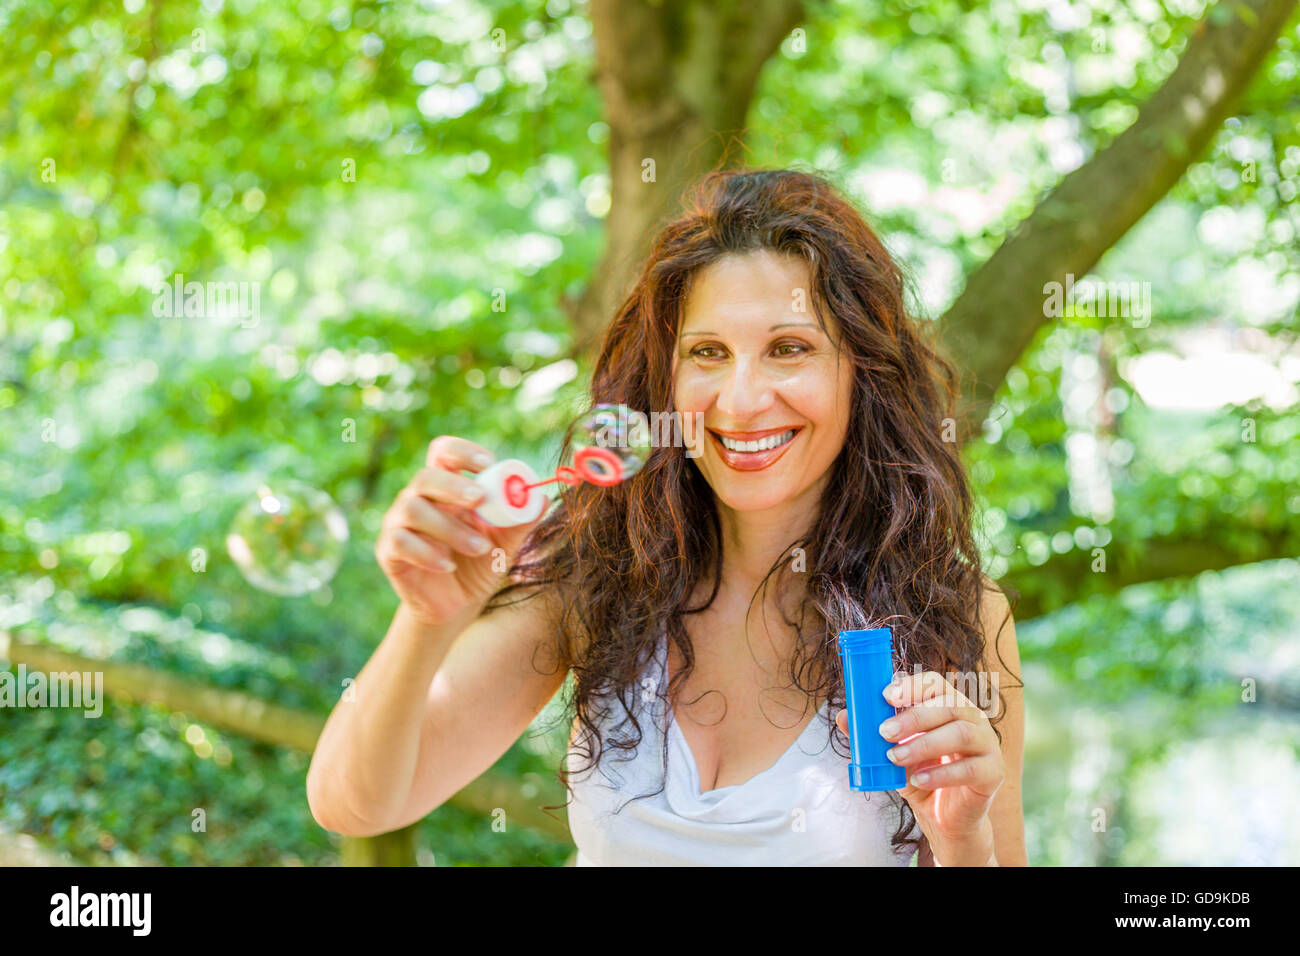 Fascinating mature adult woman is having fun like a child blowing soap bubbles in a public park Stock Photo